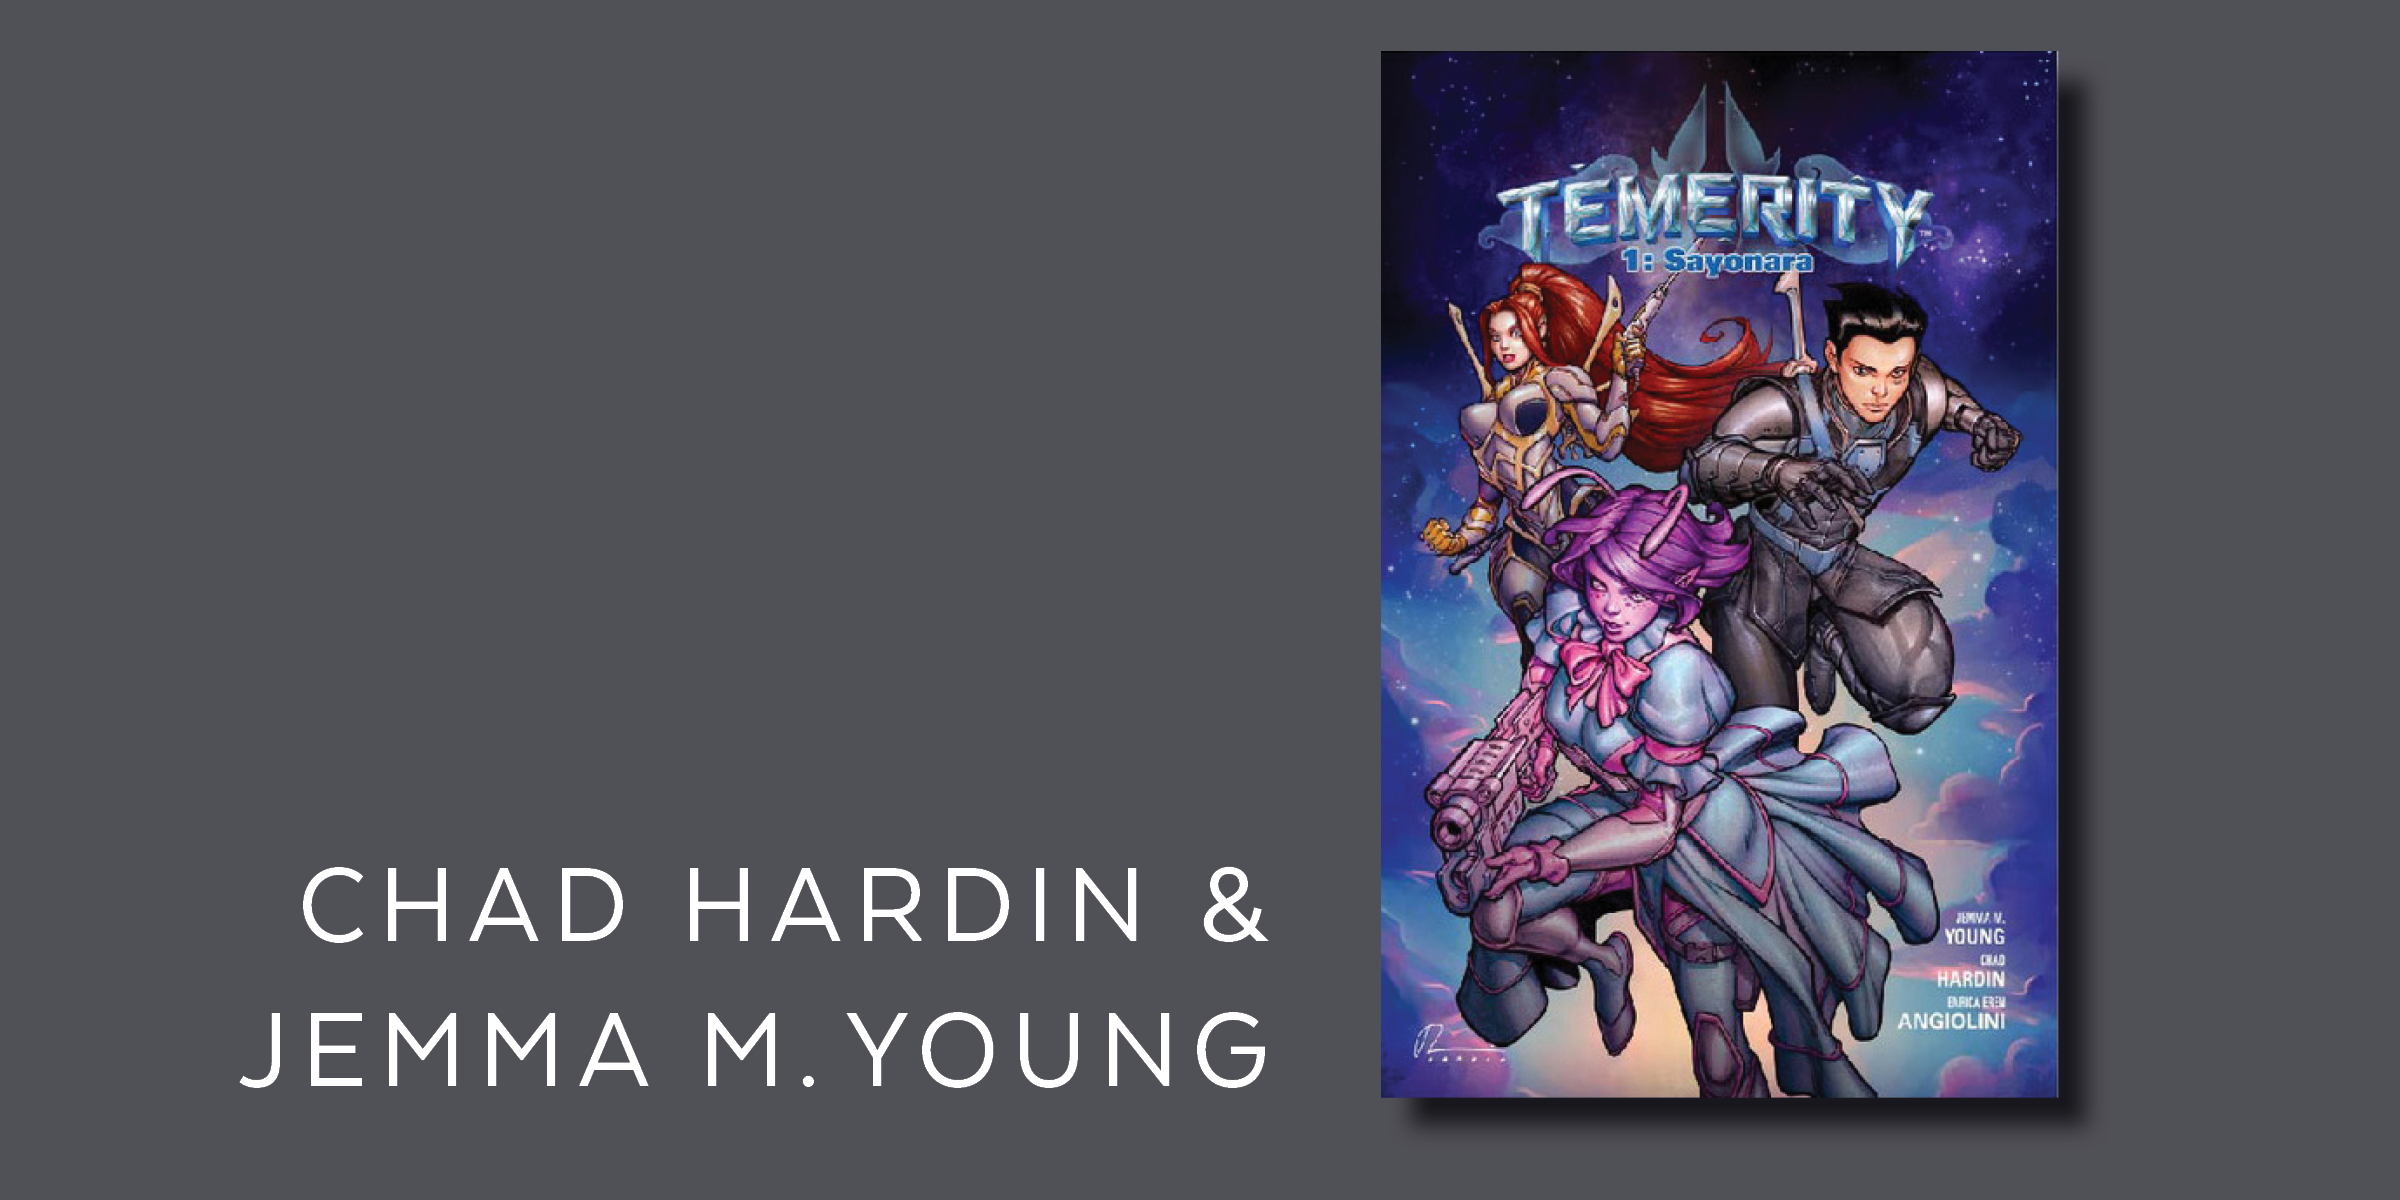 Comic book proofreading for Chad Hardin & Jemma M. Young's Temerity